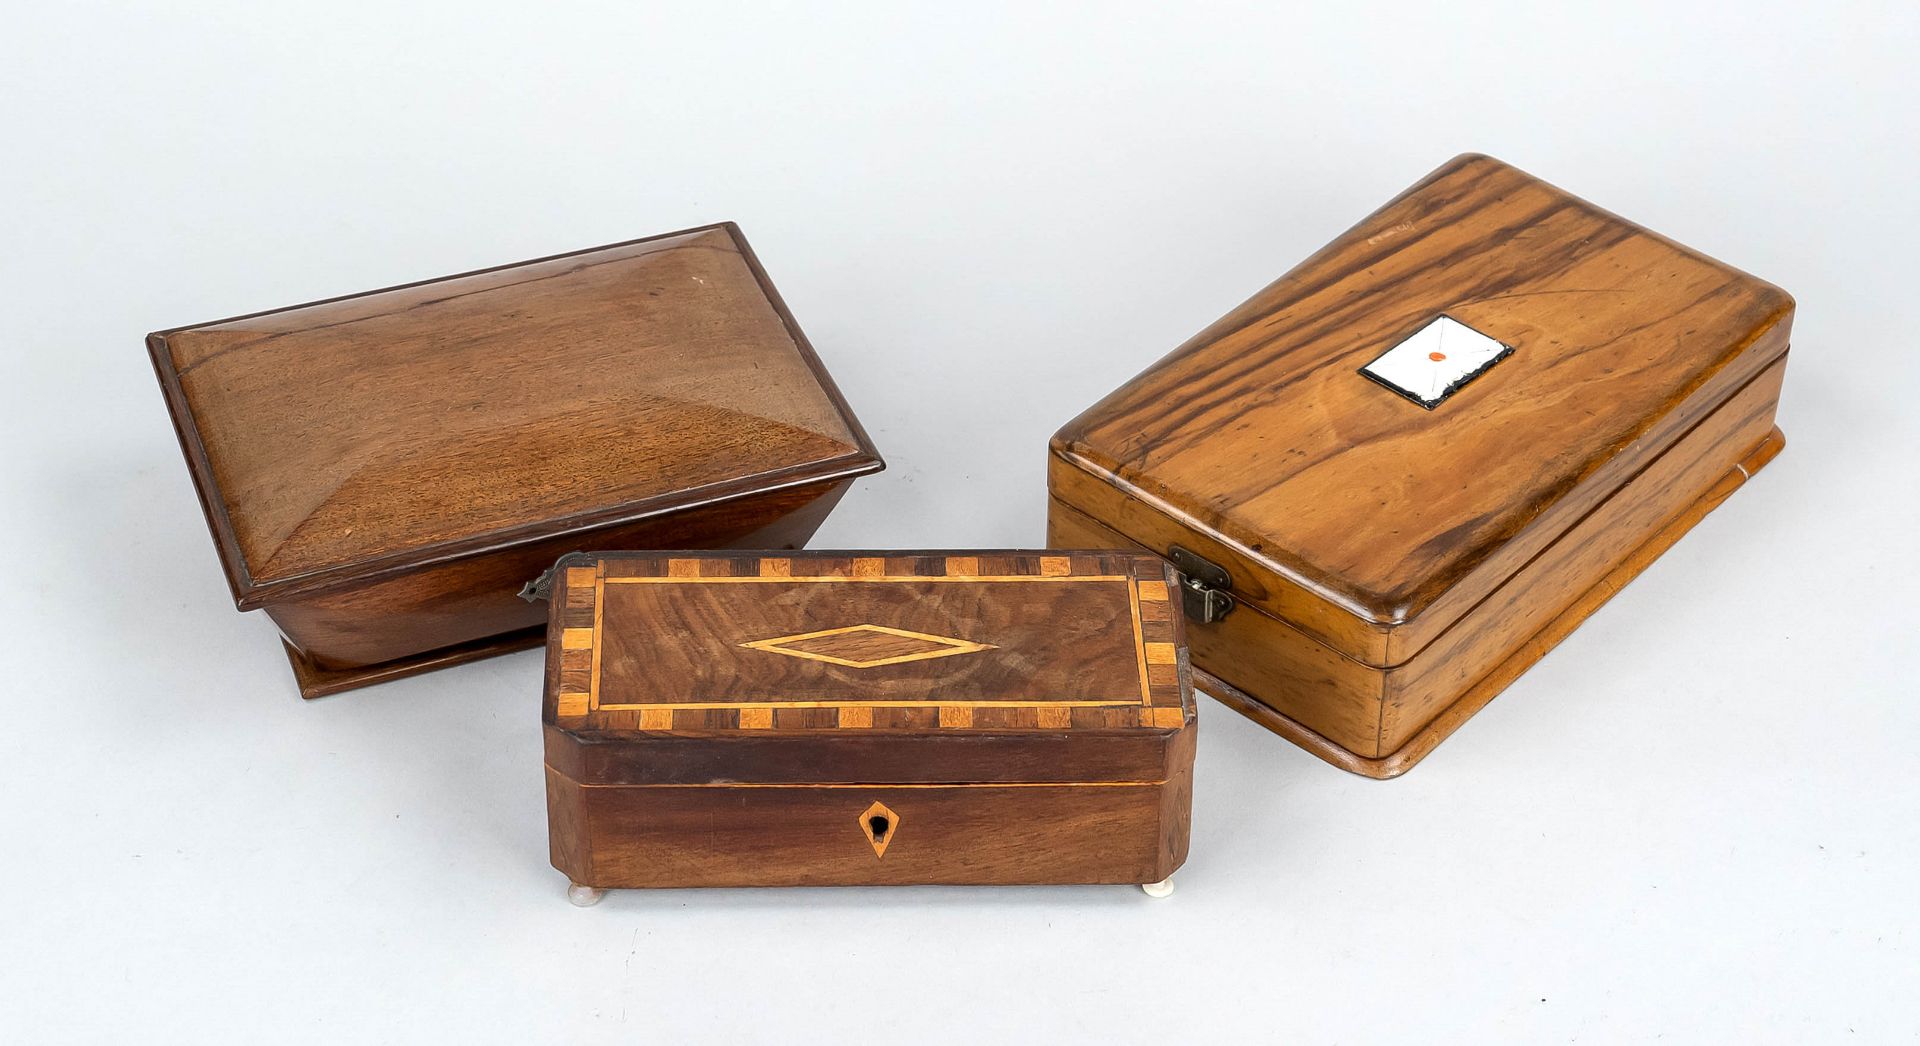 3 lidded boxes, 19th/20th c., various shapes and woods. The largest made of walnut for playing